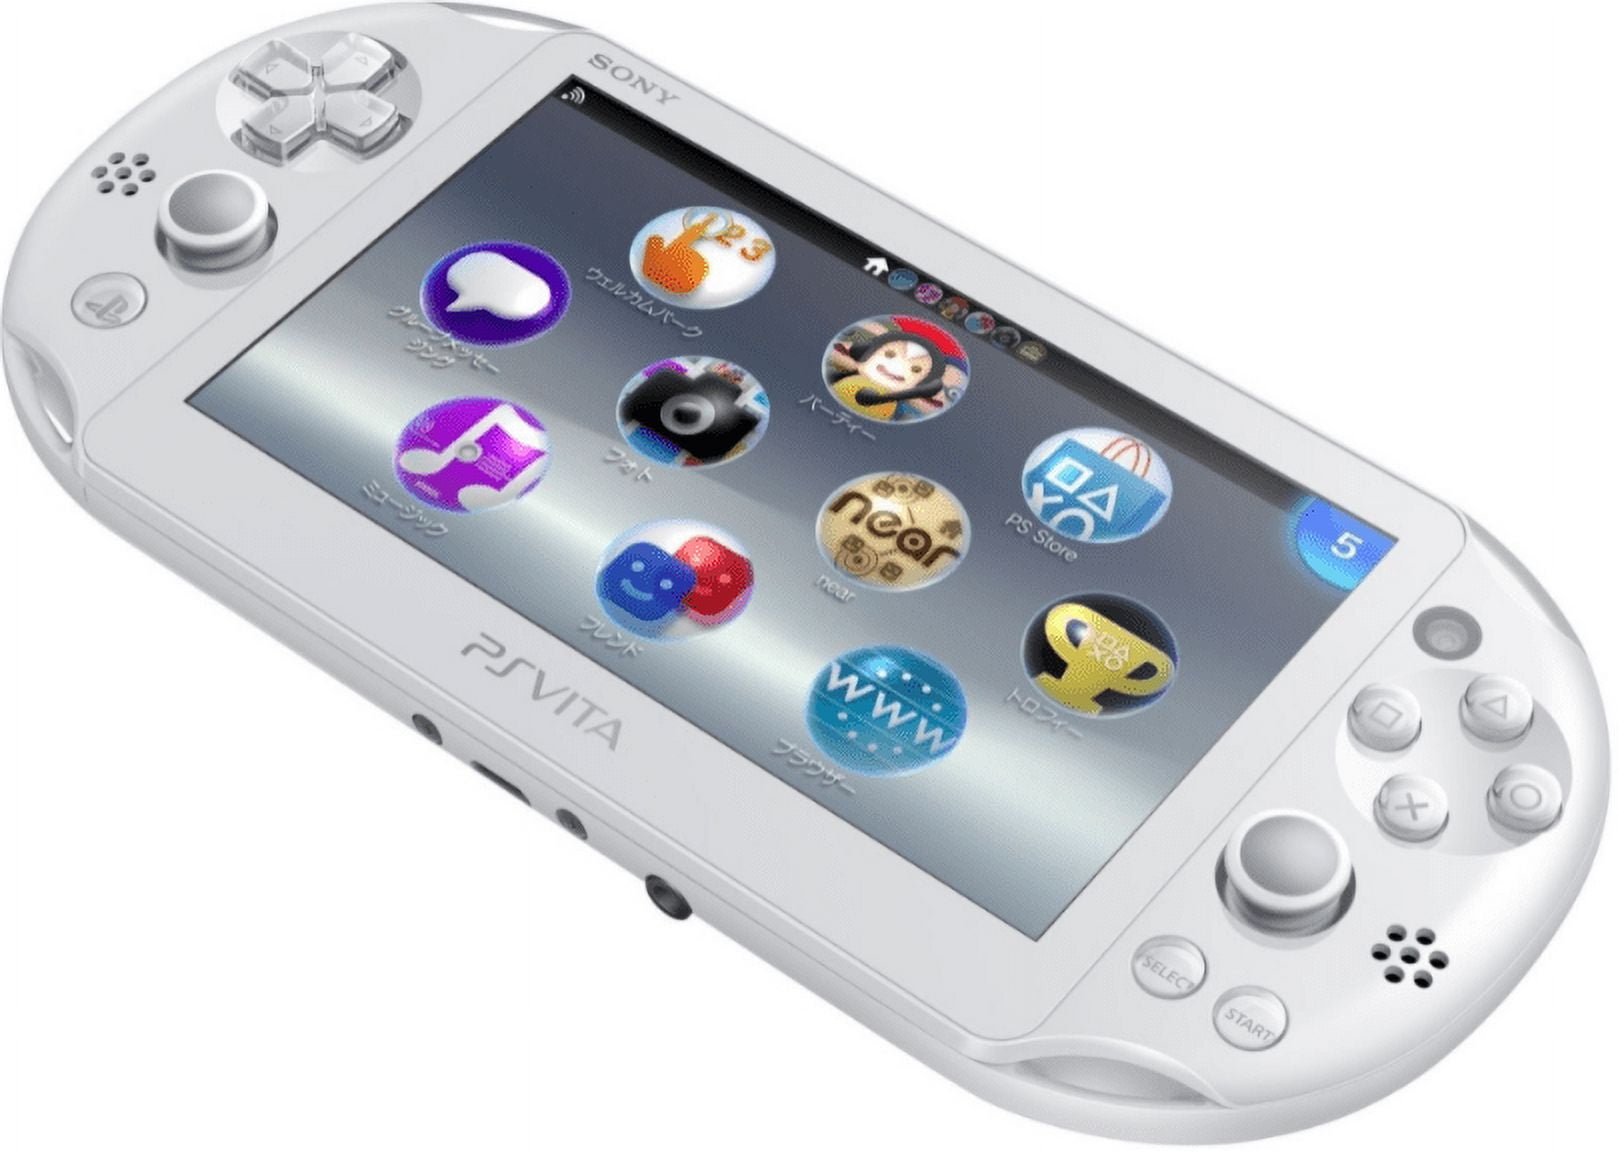 Pre-Owned Authentic PlayStation Ps Vita 2000 Console WiFi - White - (Like  New)